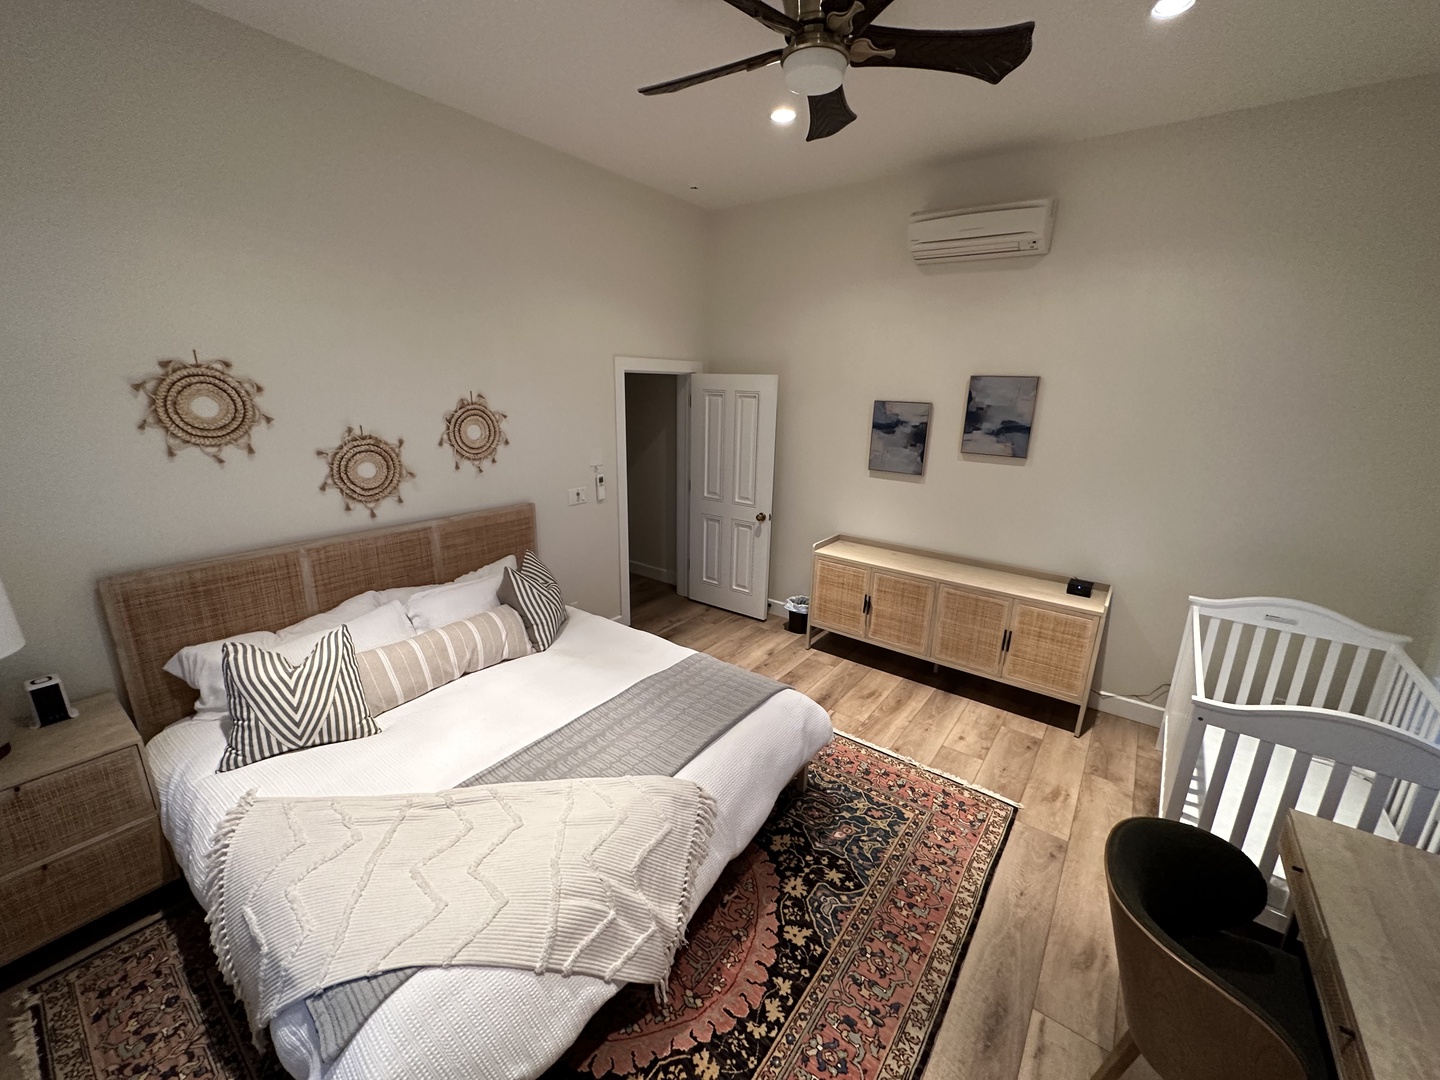 Kailua Kona Vacation Rentals, Kailua Kona Estate** - This room can also be a wonderful spot for a crib for the youngest guests.